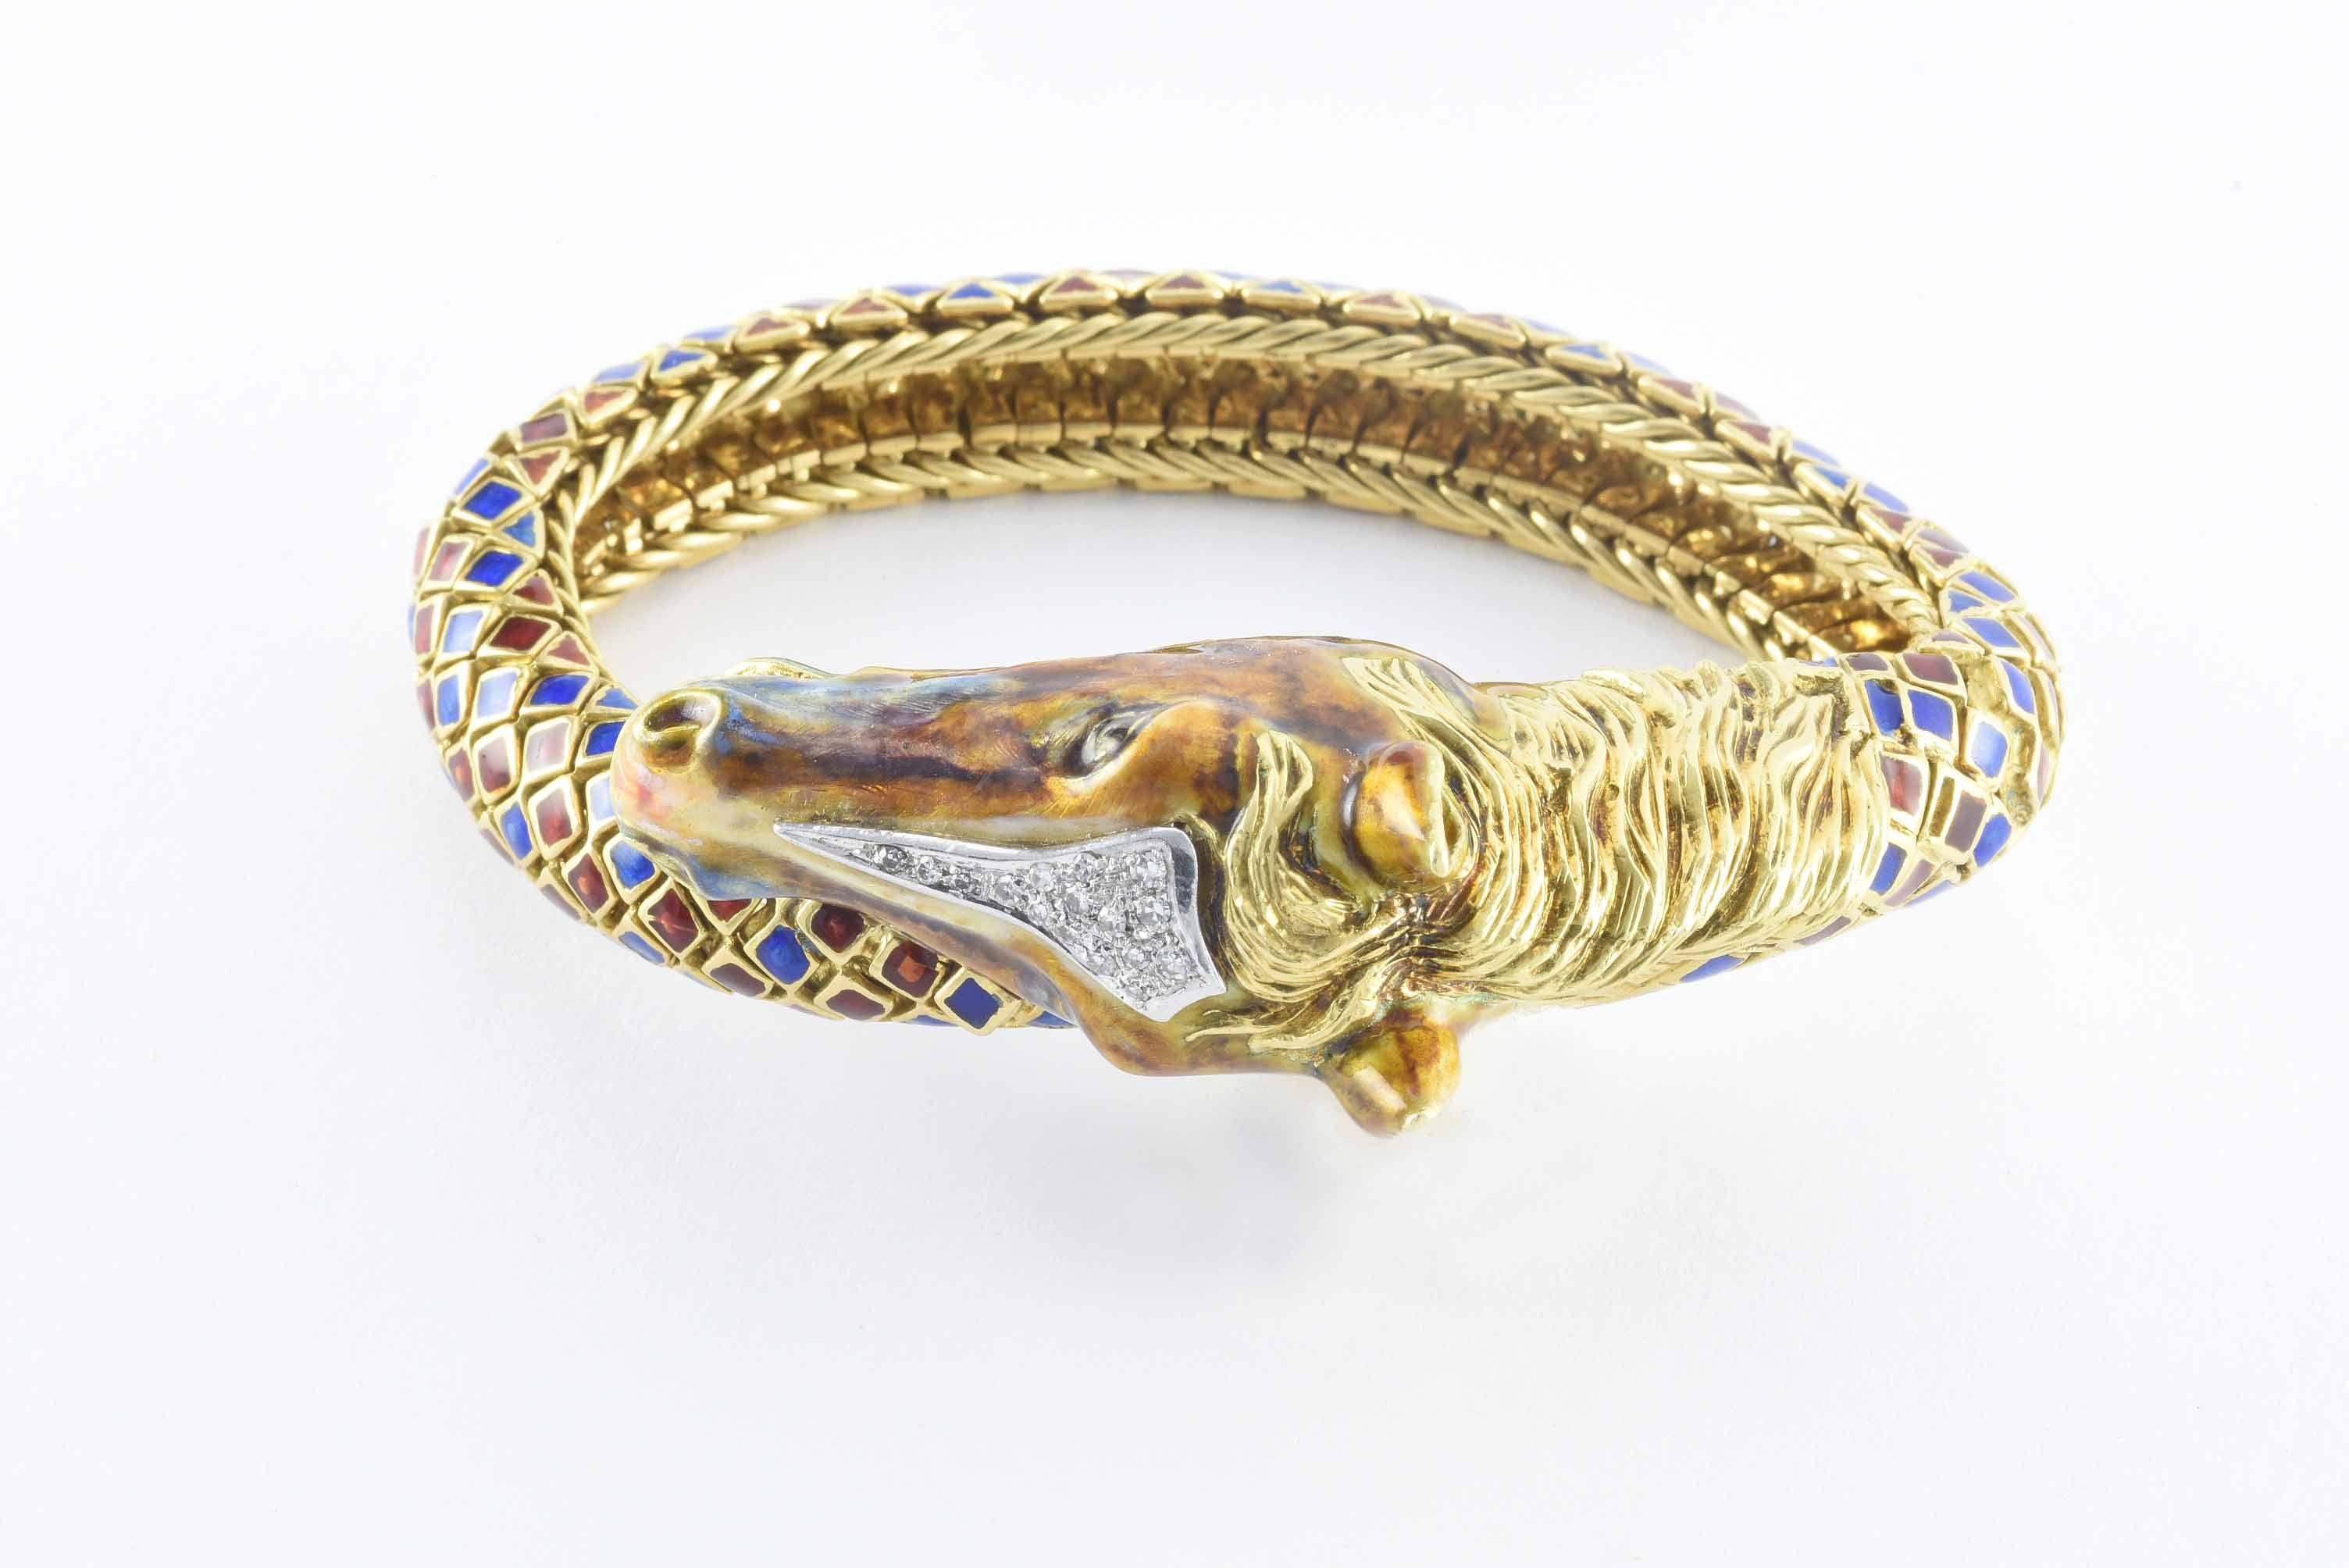 This incredible horse head link bracelet reminiscent of designs by Italian jeweler Frascarolo features an intricately carved 18kt yellow gold horse head embellished with sixteen single cut diamonds totaling approximately 0.25 carats and blue and